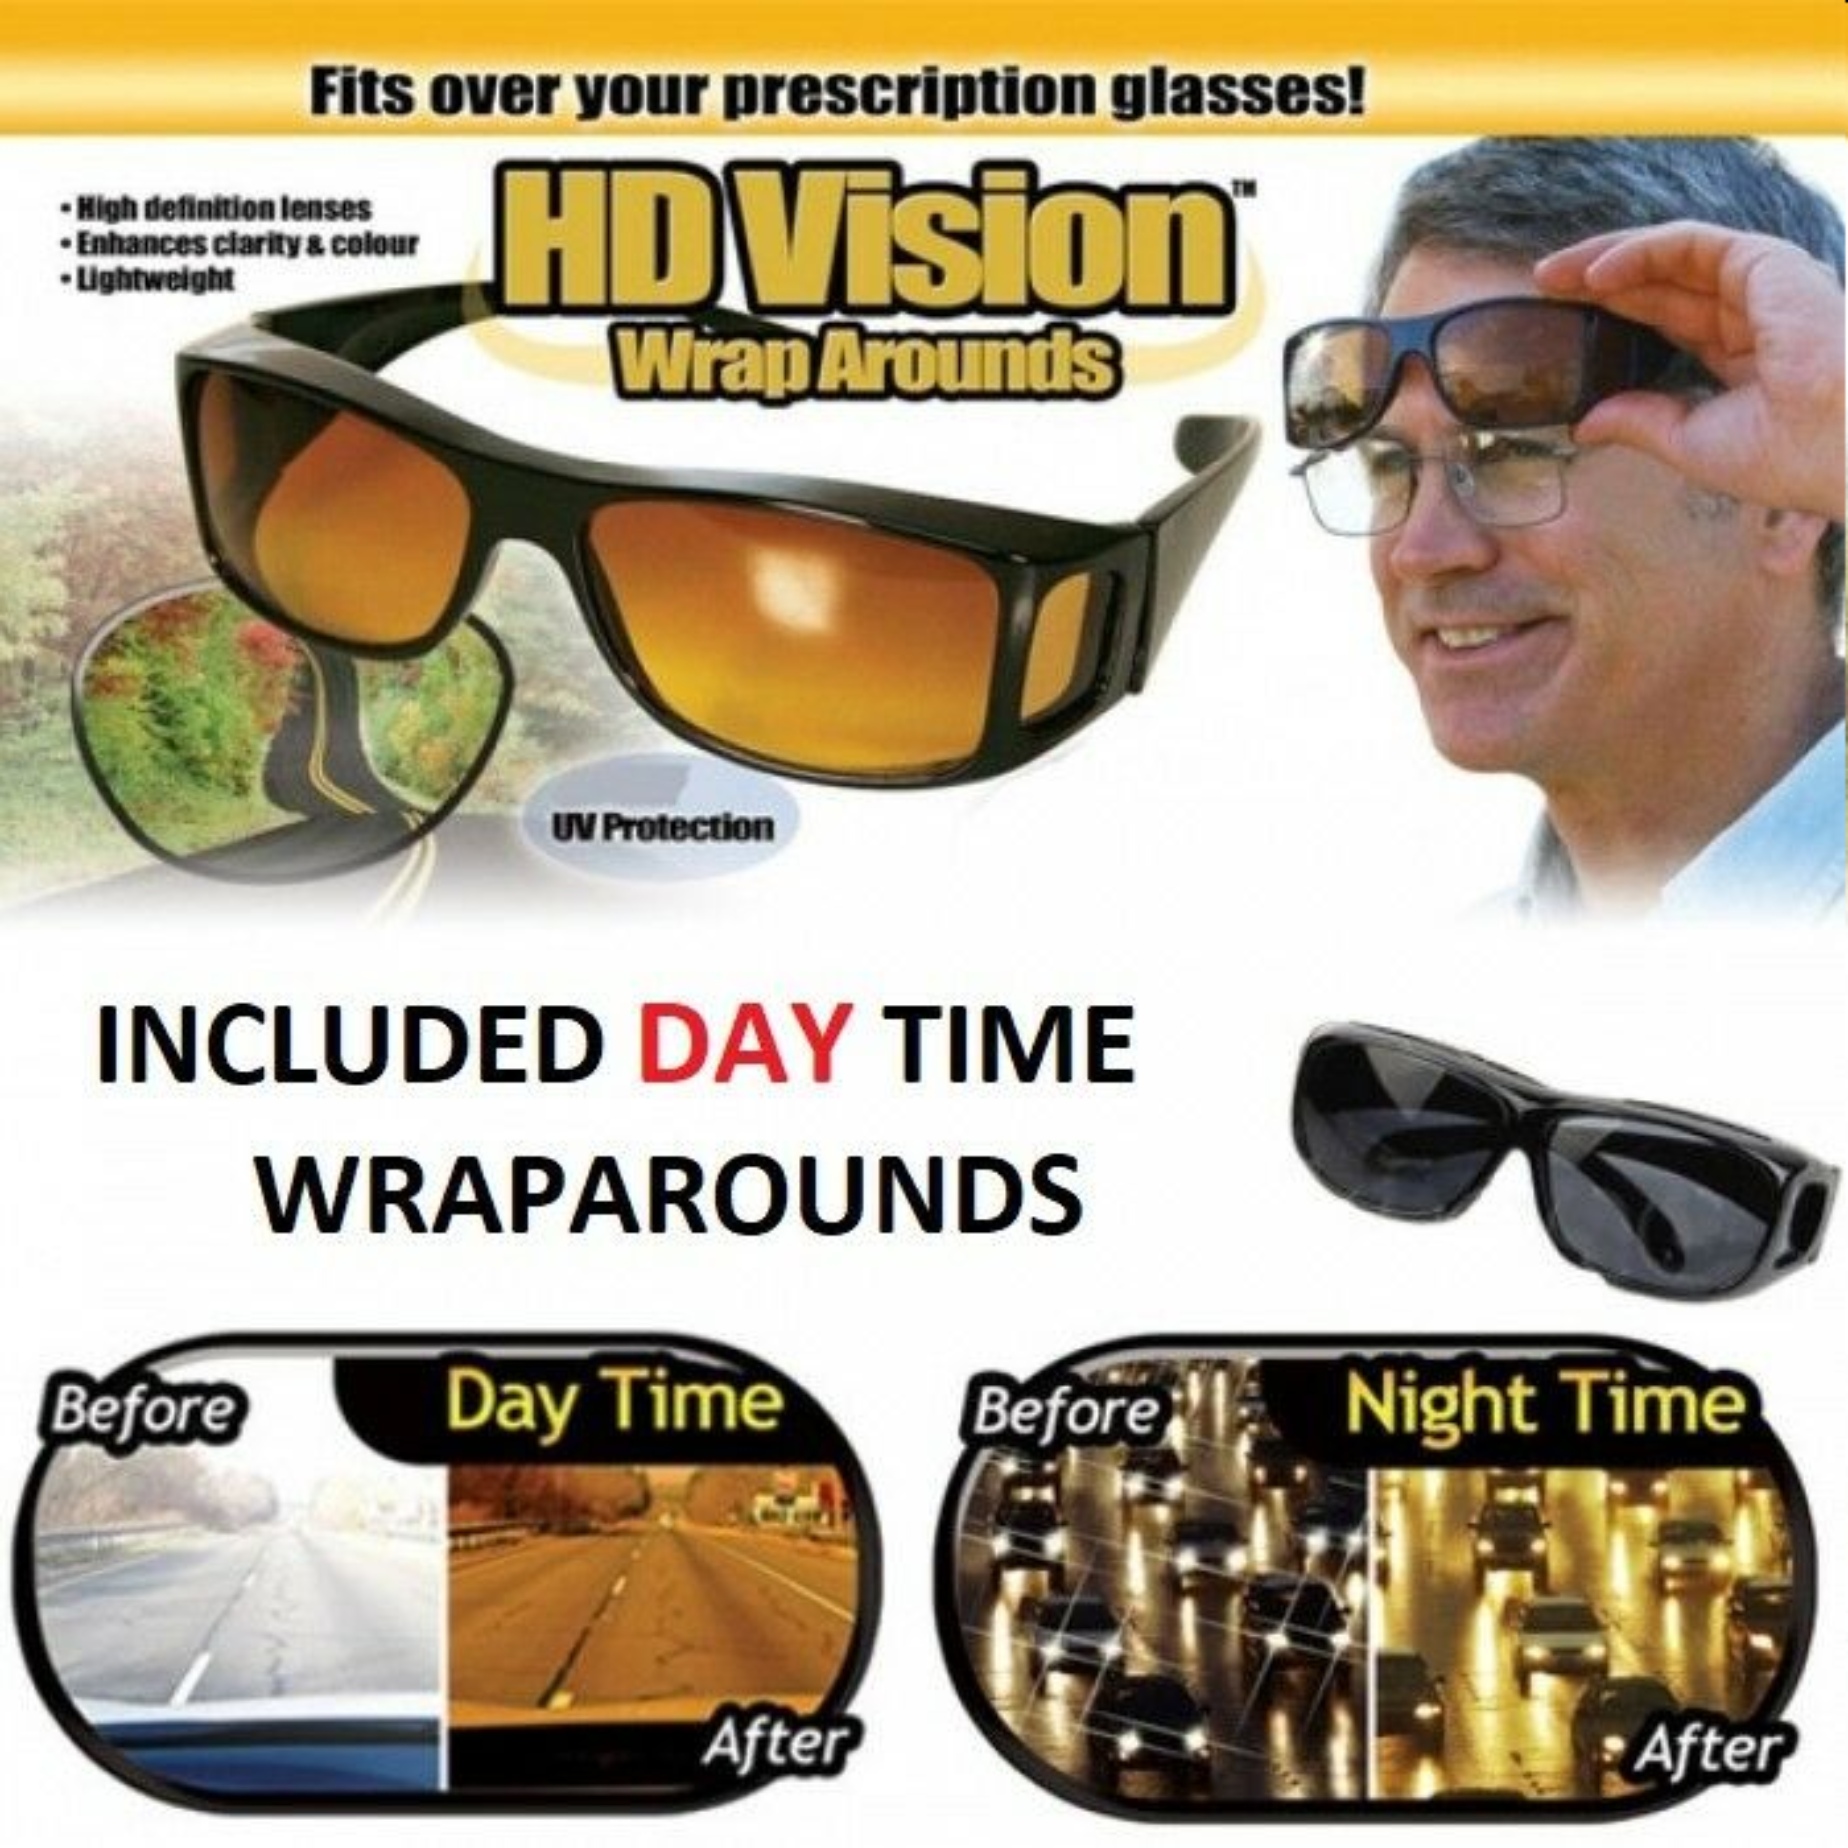 HD Night & Day Vision Wraparound Sunglasses, As Seen on TV, Fits over Glasses Bonus Pair Included - image 1 of 6